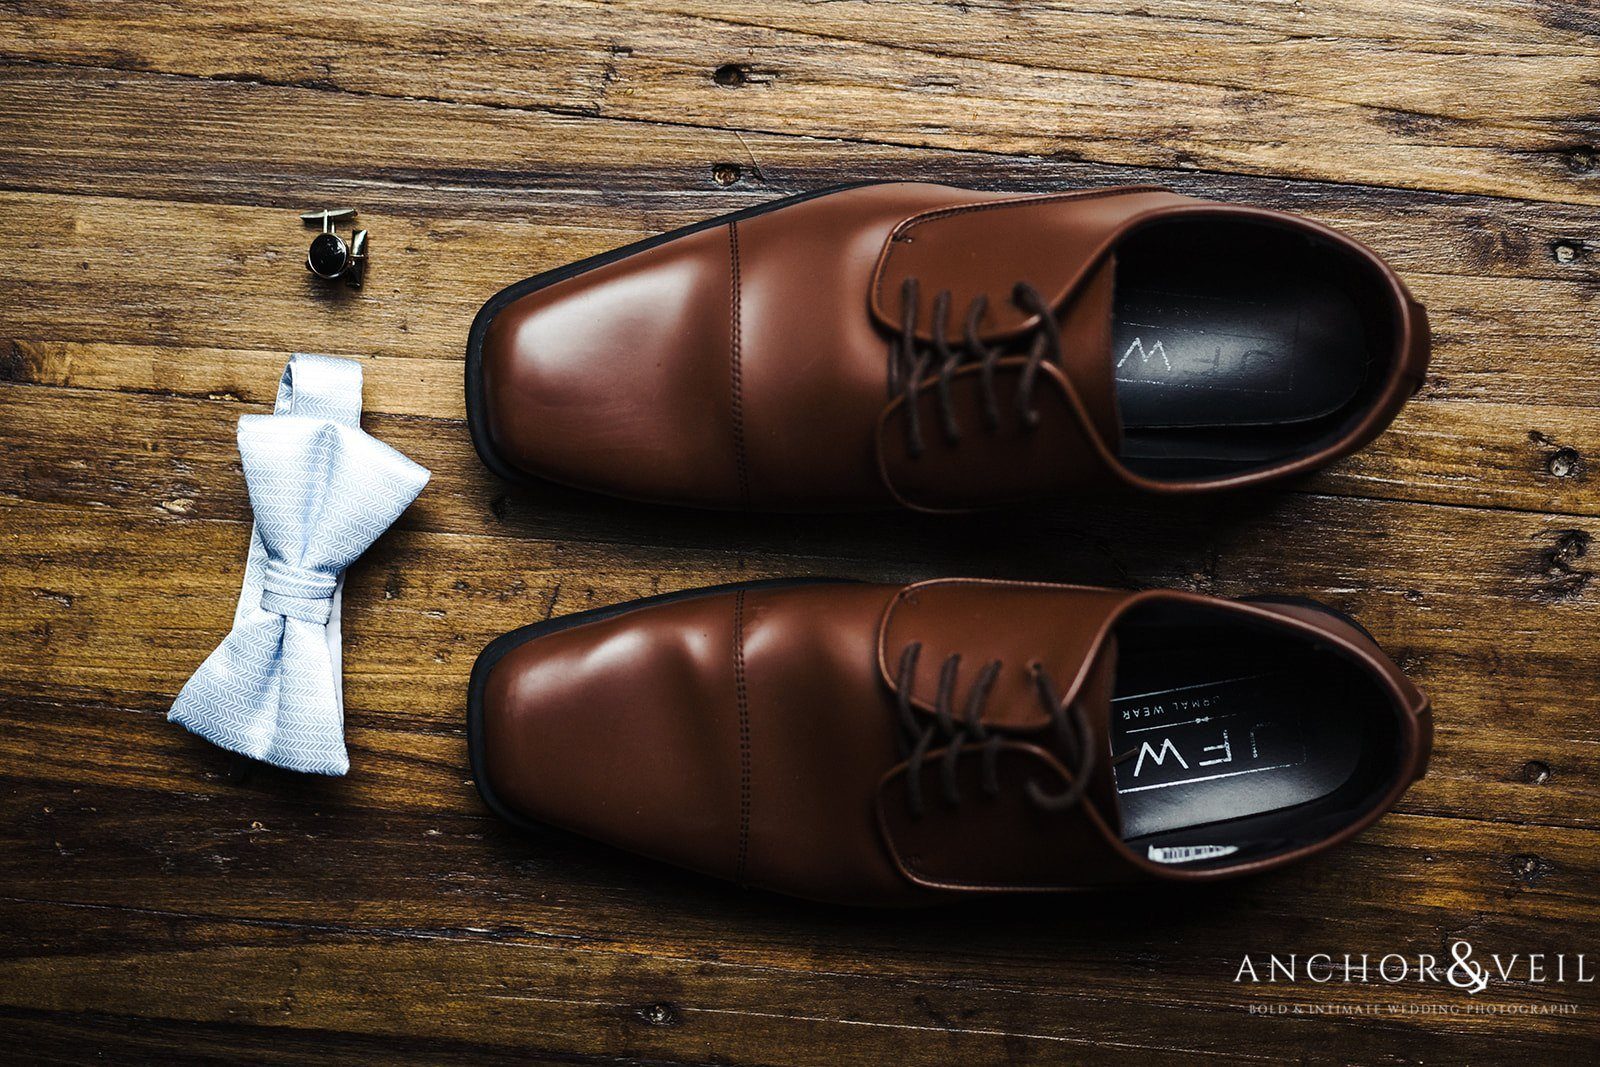 The Groom's shoes and special details for the ceremony at The Farm at Brusharbor Wedding